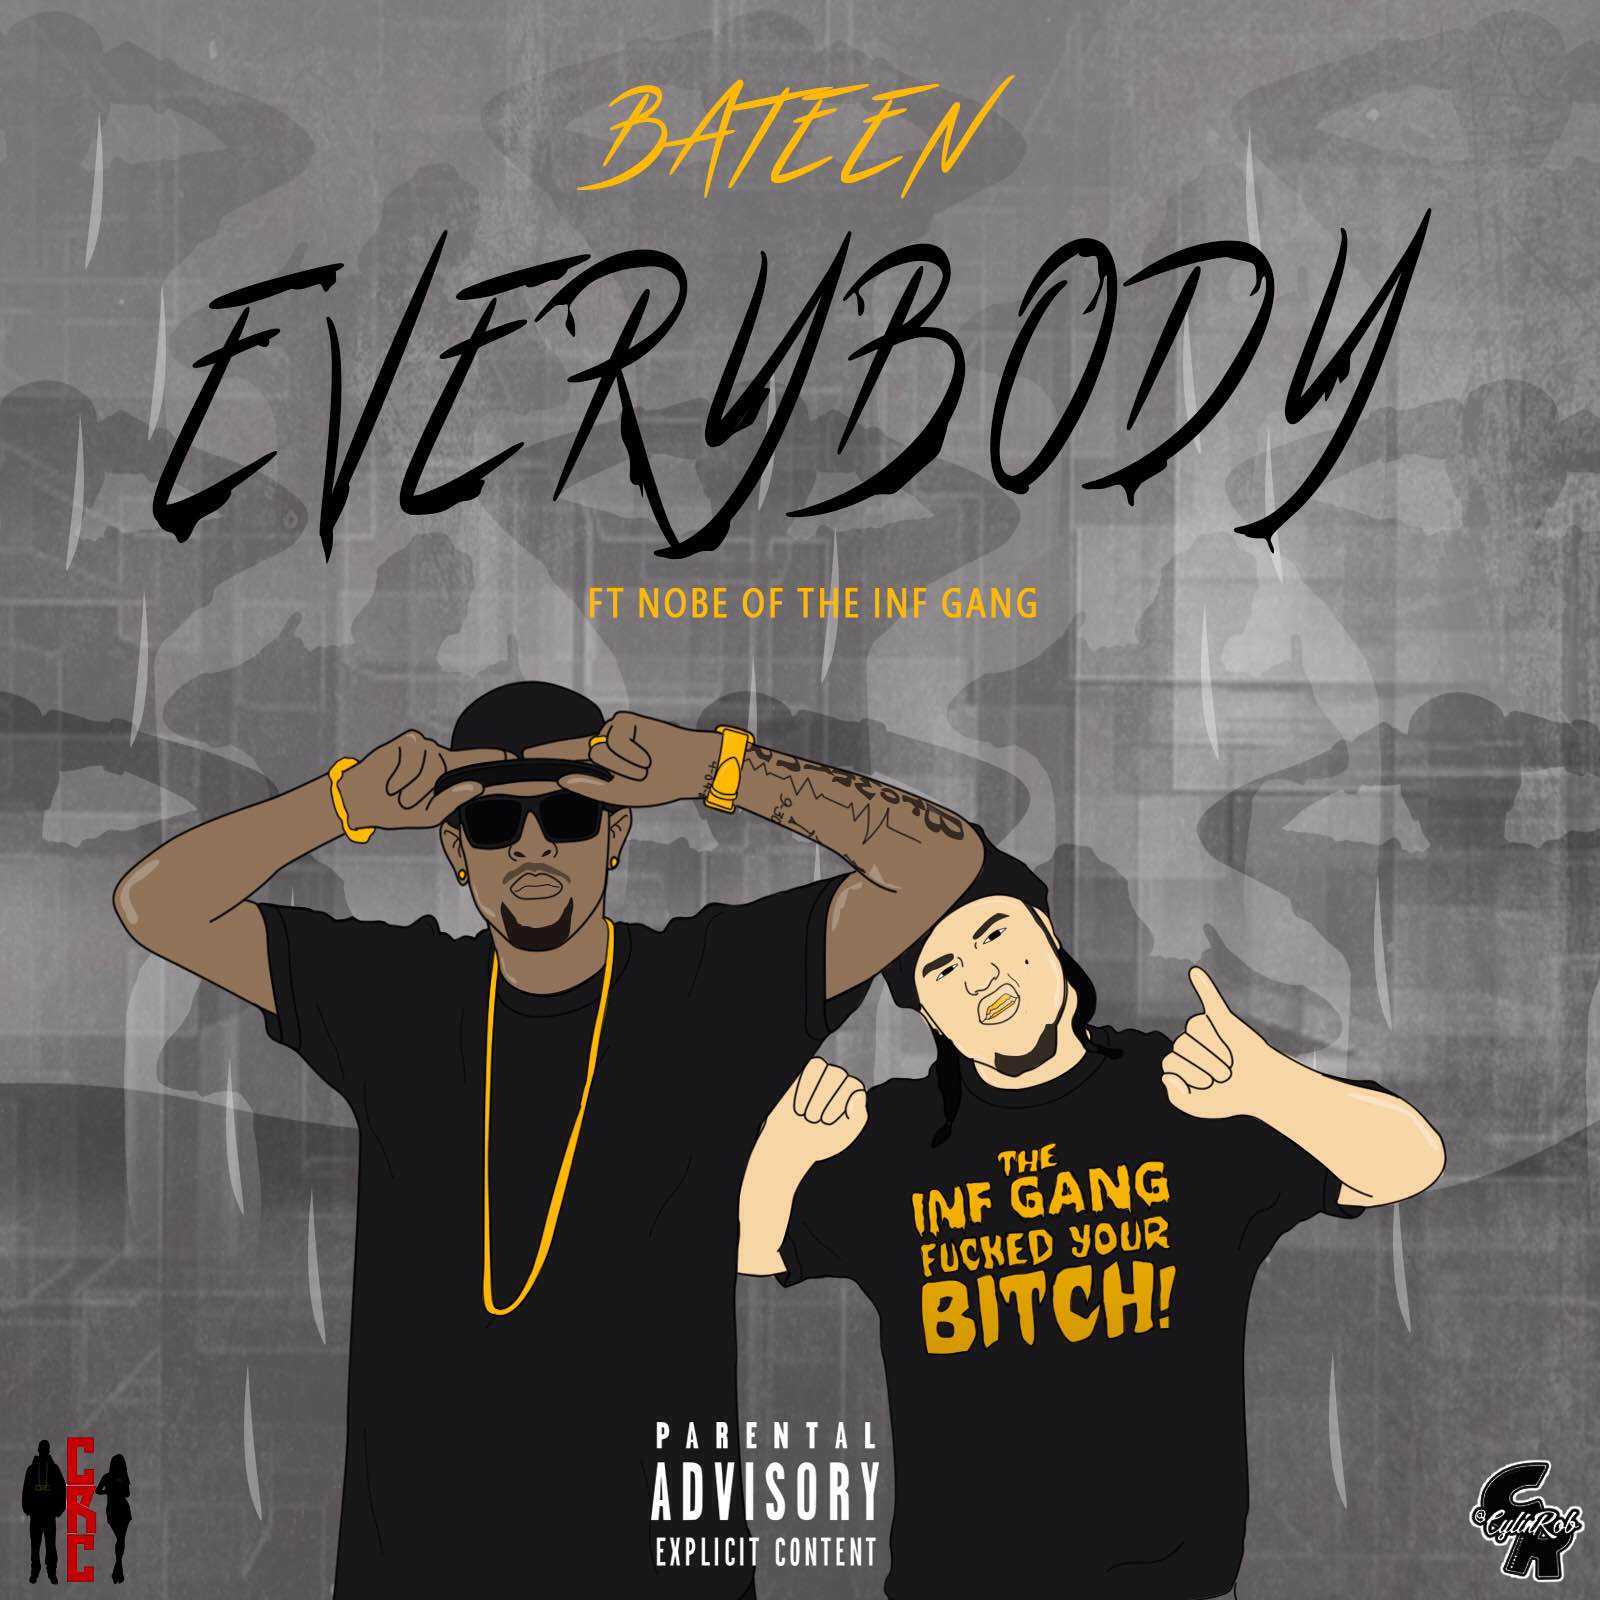 Bateen featuring Nobe of Inf Gang - "Everybody" (Official Music Video)